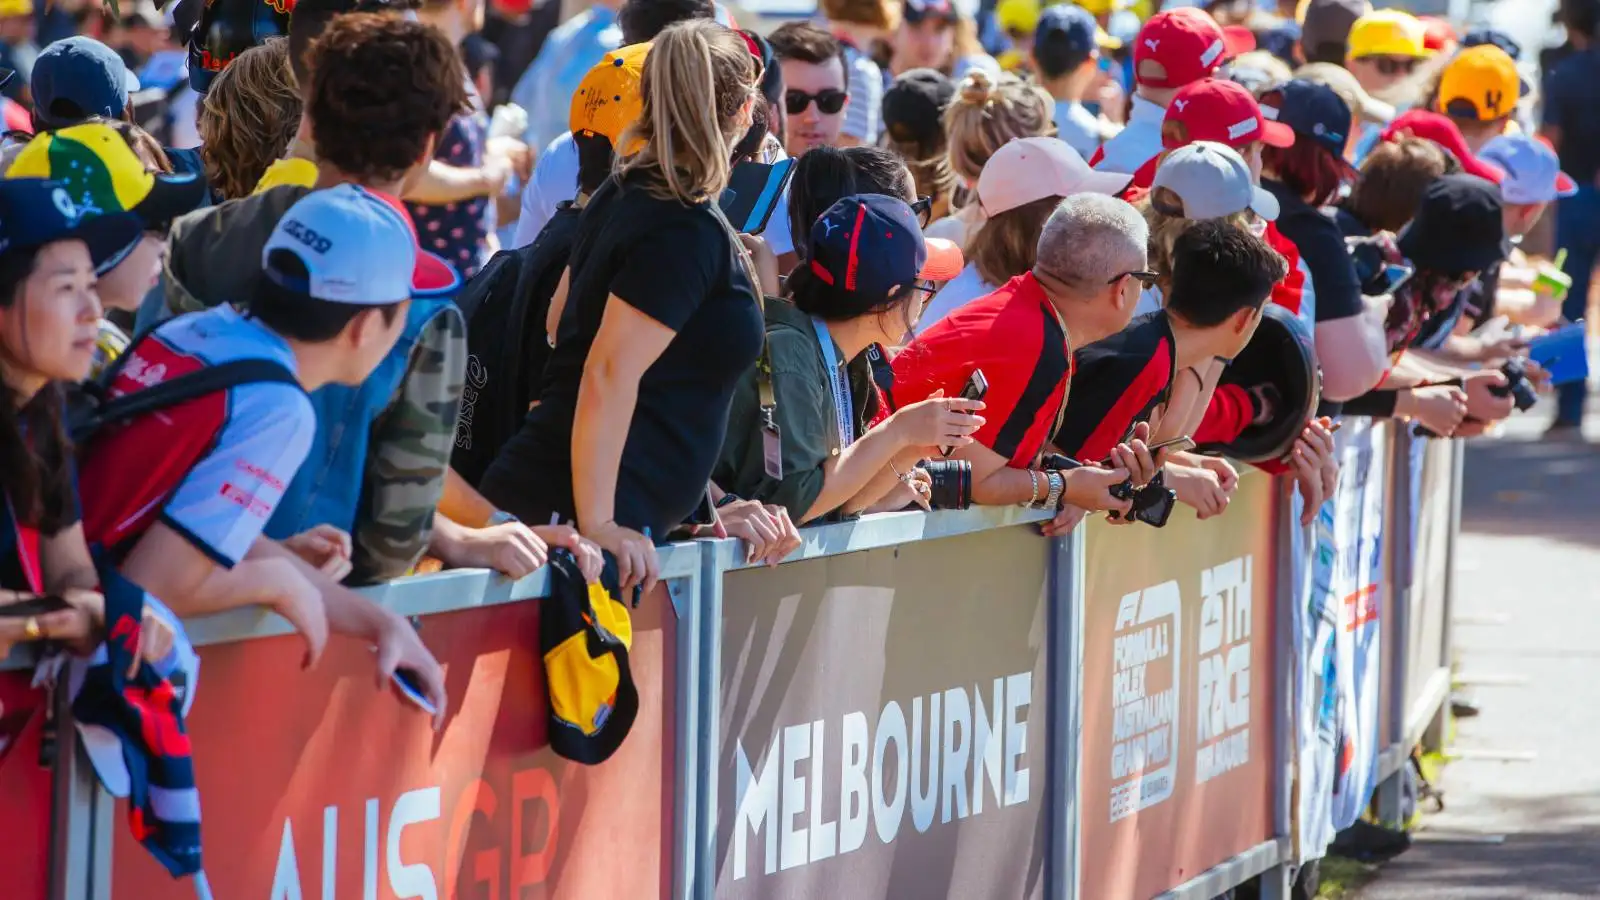 Fans behind the barrier at the Australian GP. Melbourne March 2020.